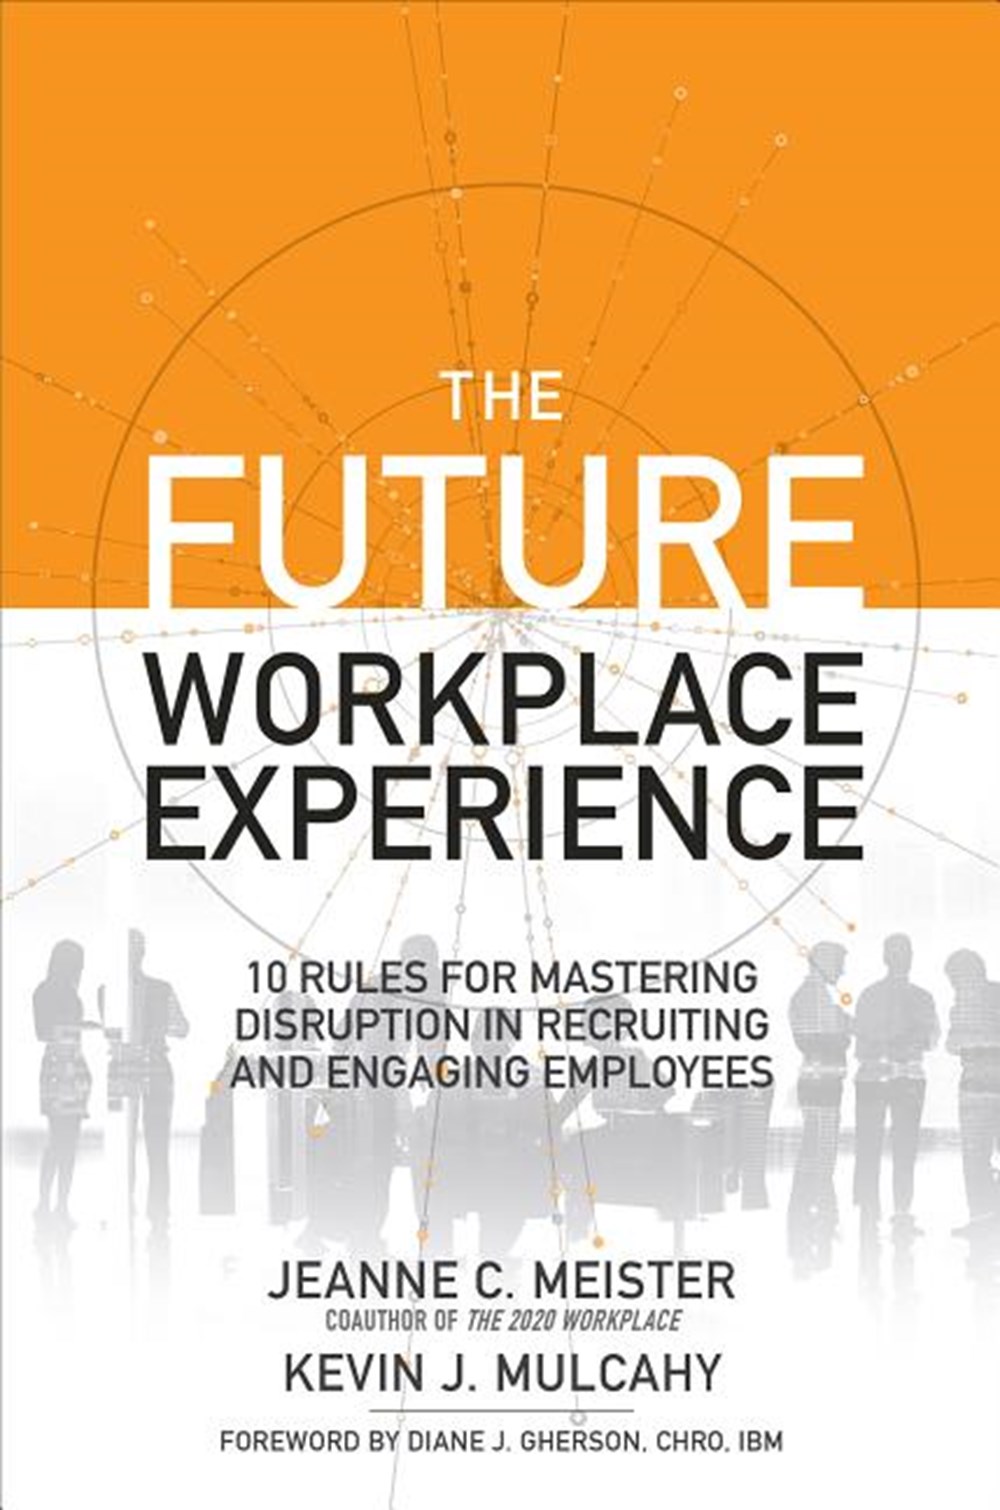 Future Workplace Experience 10 Rules for Mastering Disruption in Recruiting and Engaging Employees